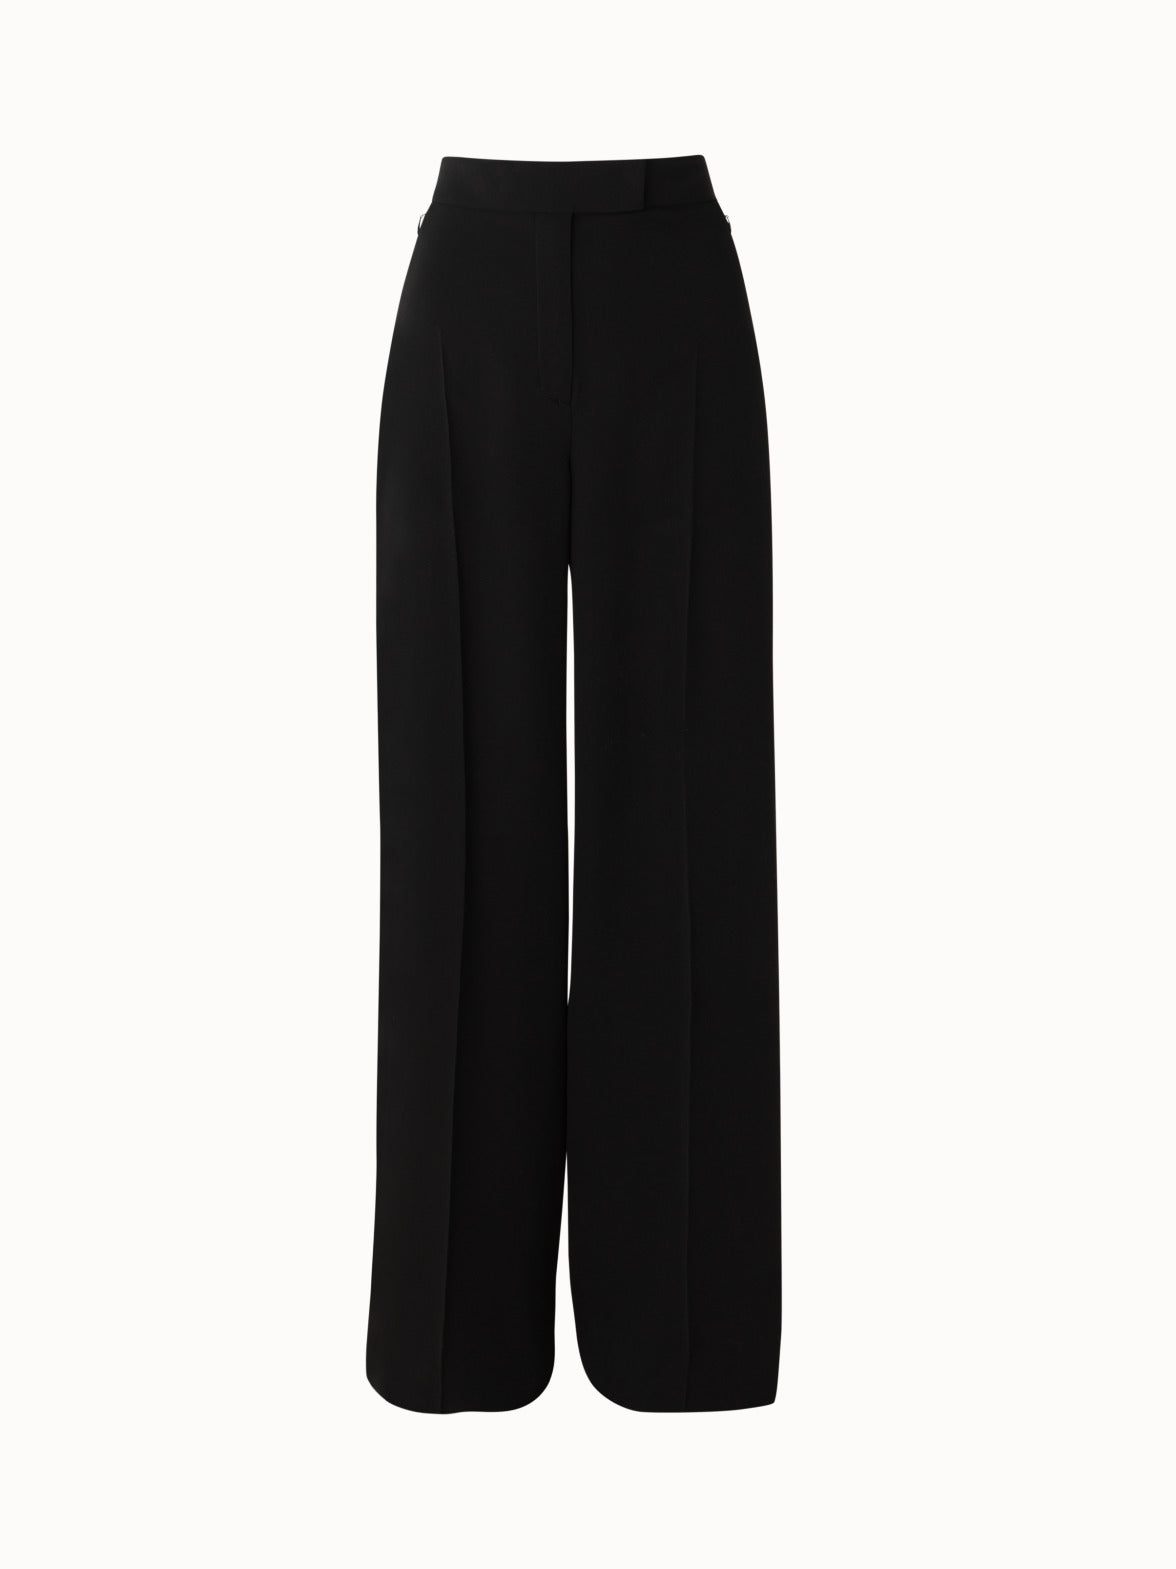 Shop Black Layered Palazzo Pants by AAKAAR at House of Designers  HOUSE OF  DESIGNERS